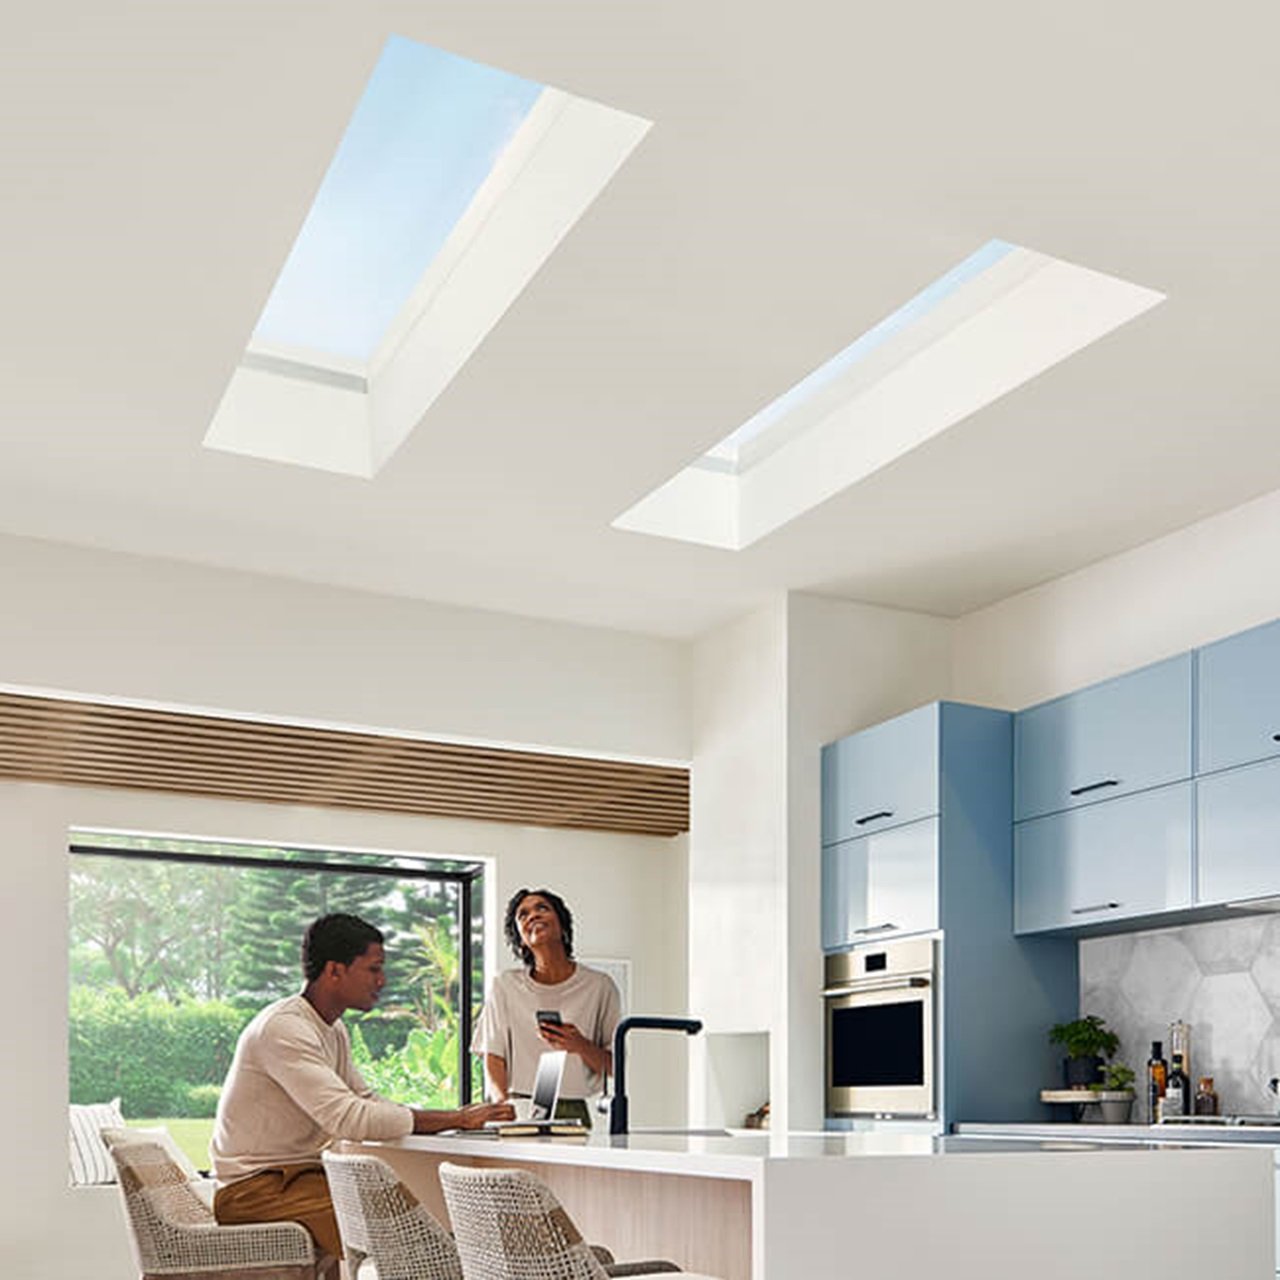 Interior of home with two people sitting in Kitchen with Marvin Skycove window box and Marvin Awaken Skylights